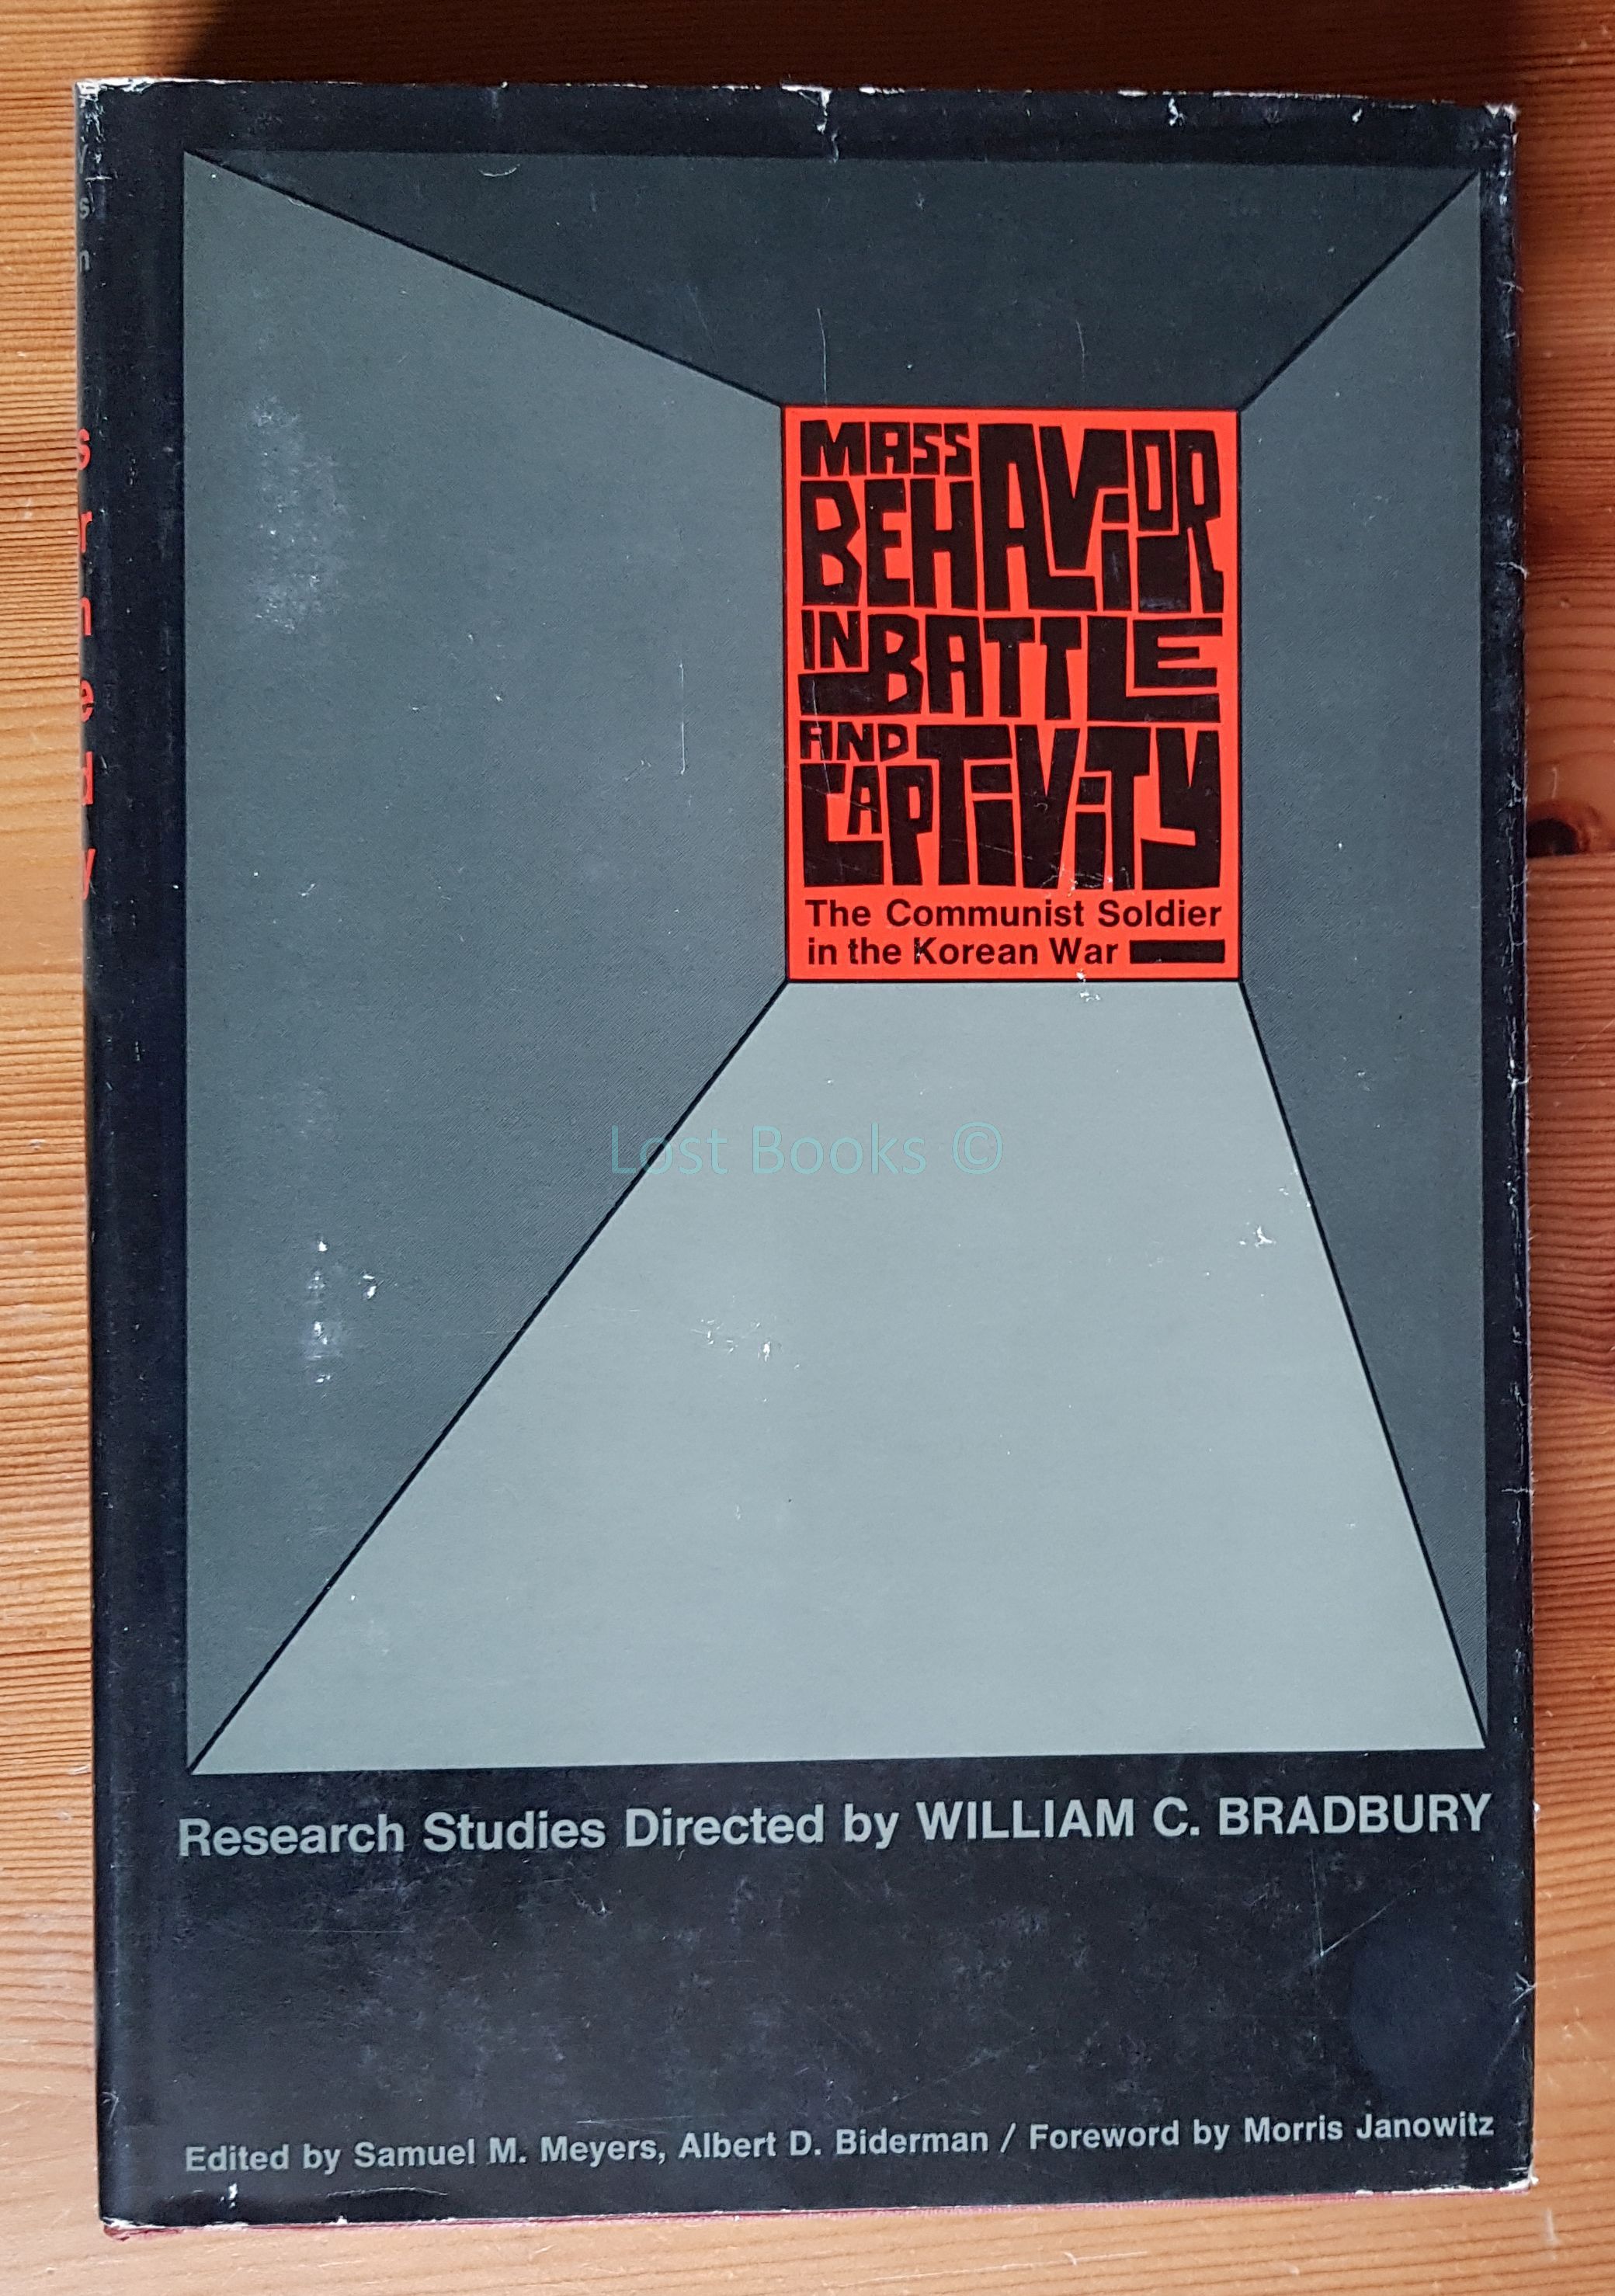 Mass Behavior in Battle and Captivity, The Communist Soldier in the ...